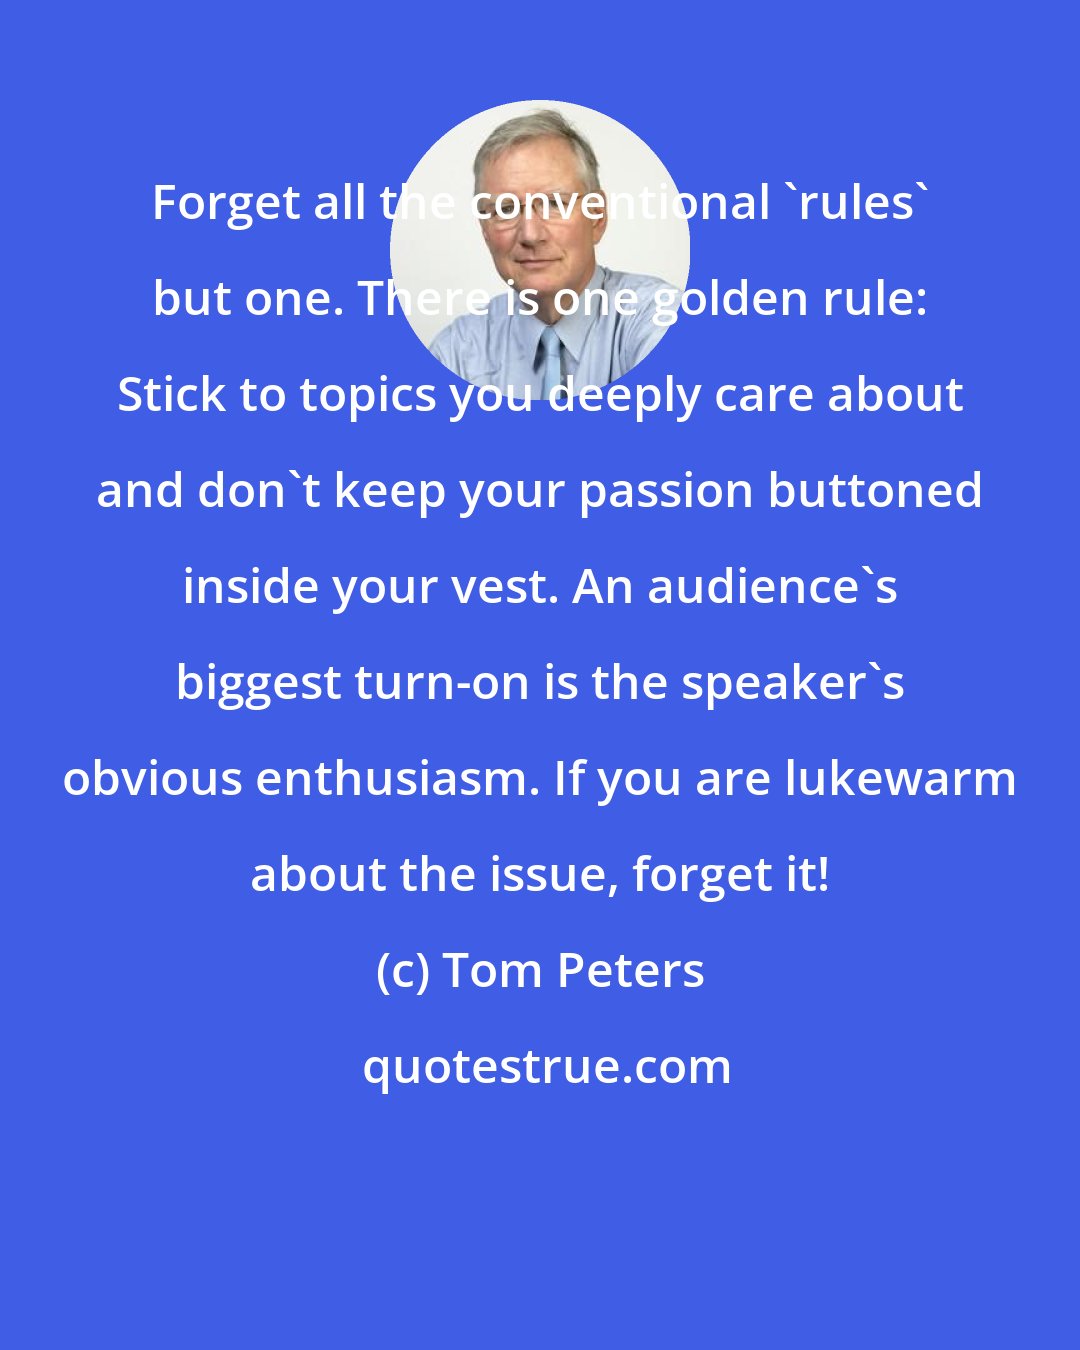 Tom Peters: Forget all the conventional 'rules' but one. There is one golden rule: Stick to topics you deeply care about and don't keep your passion buttoned inside your vest. An audience's biggest turn-on is the speaker's obvious enthusiasm. If you are lukewarm about the issue, forget it!